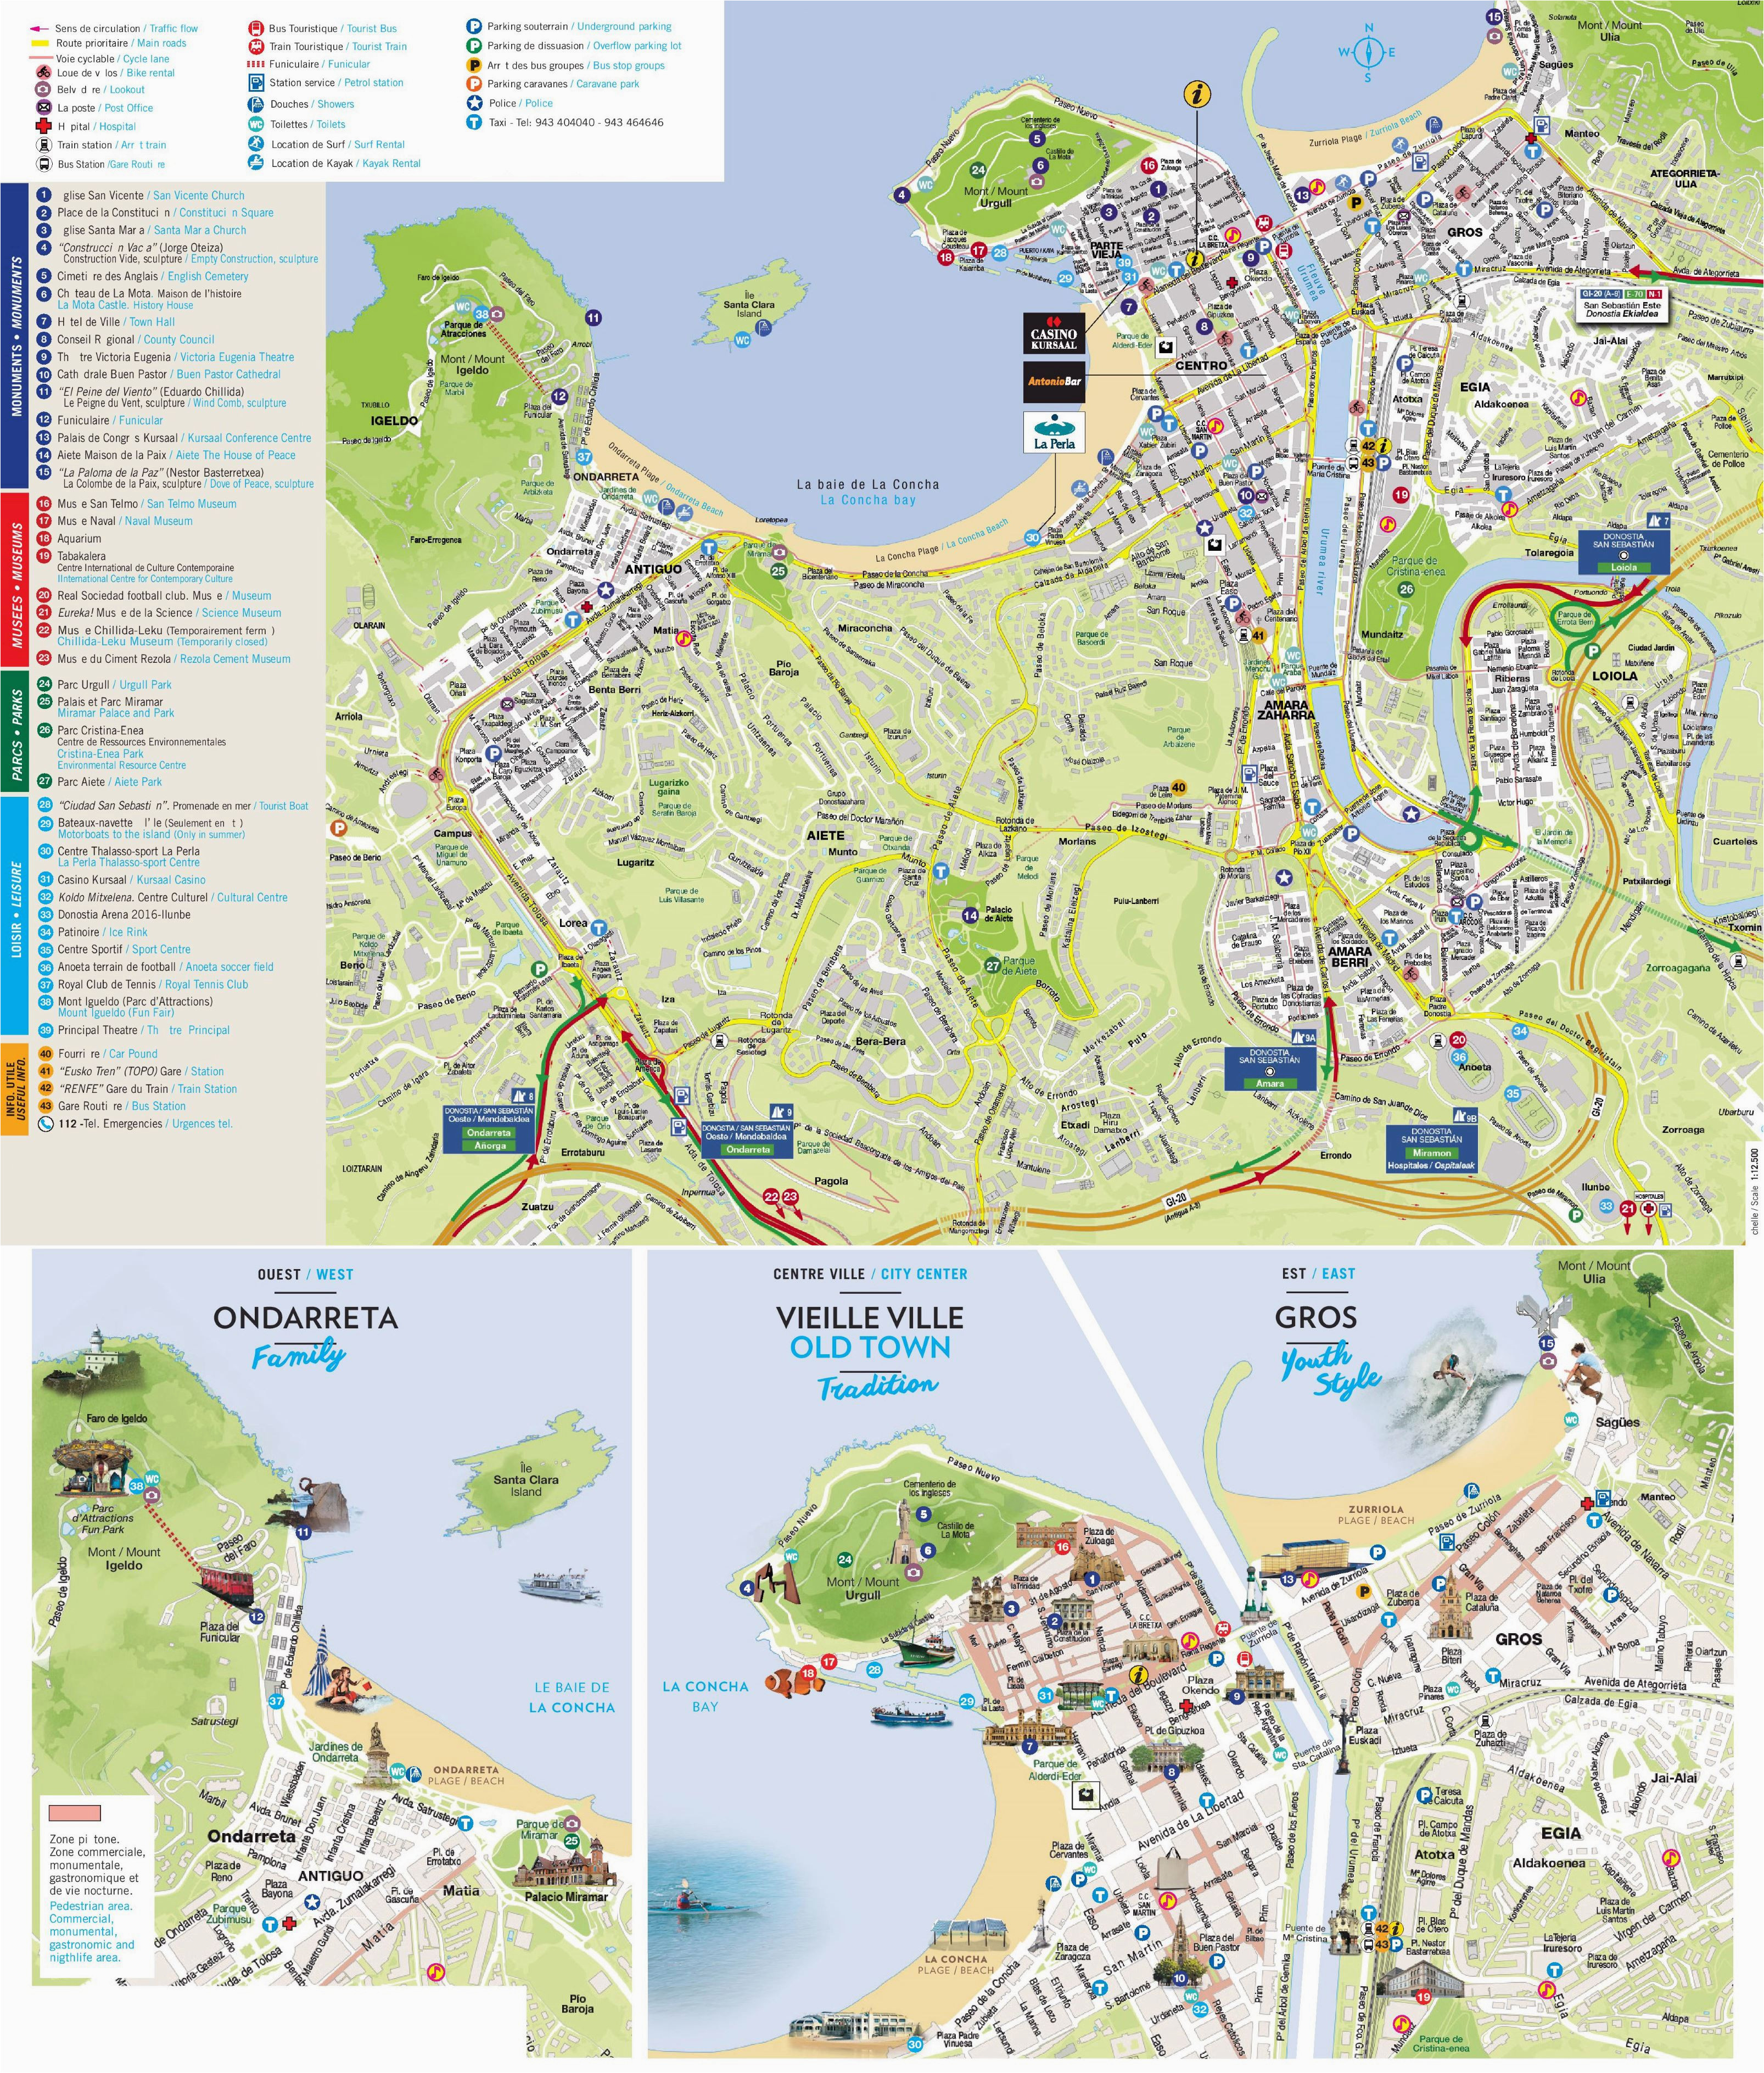 large san sebastian maps for free download and print high